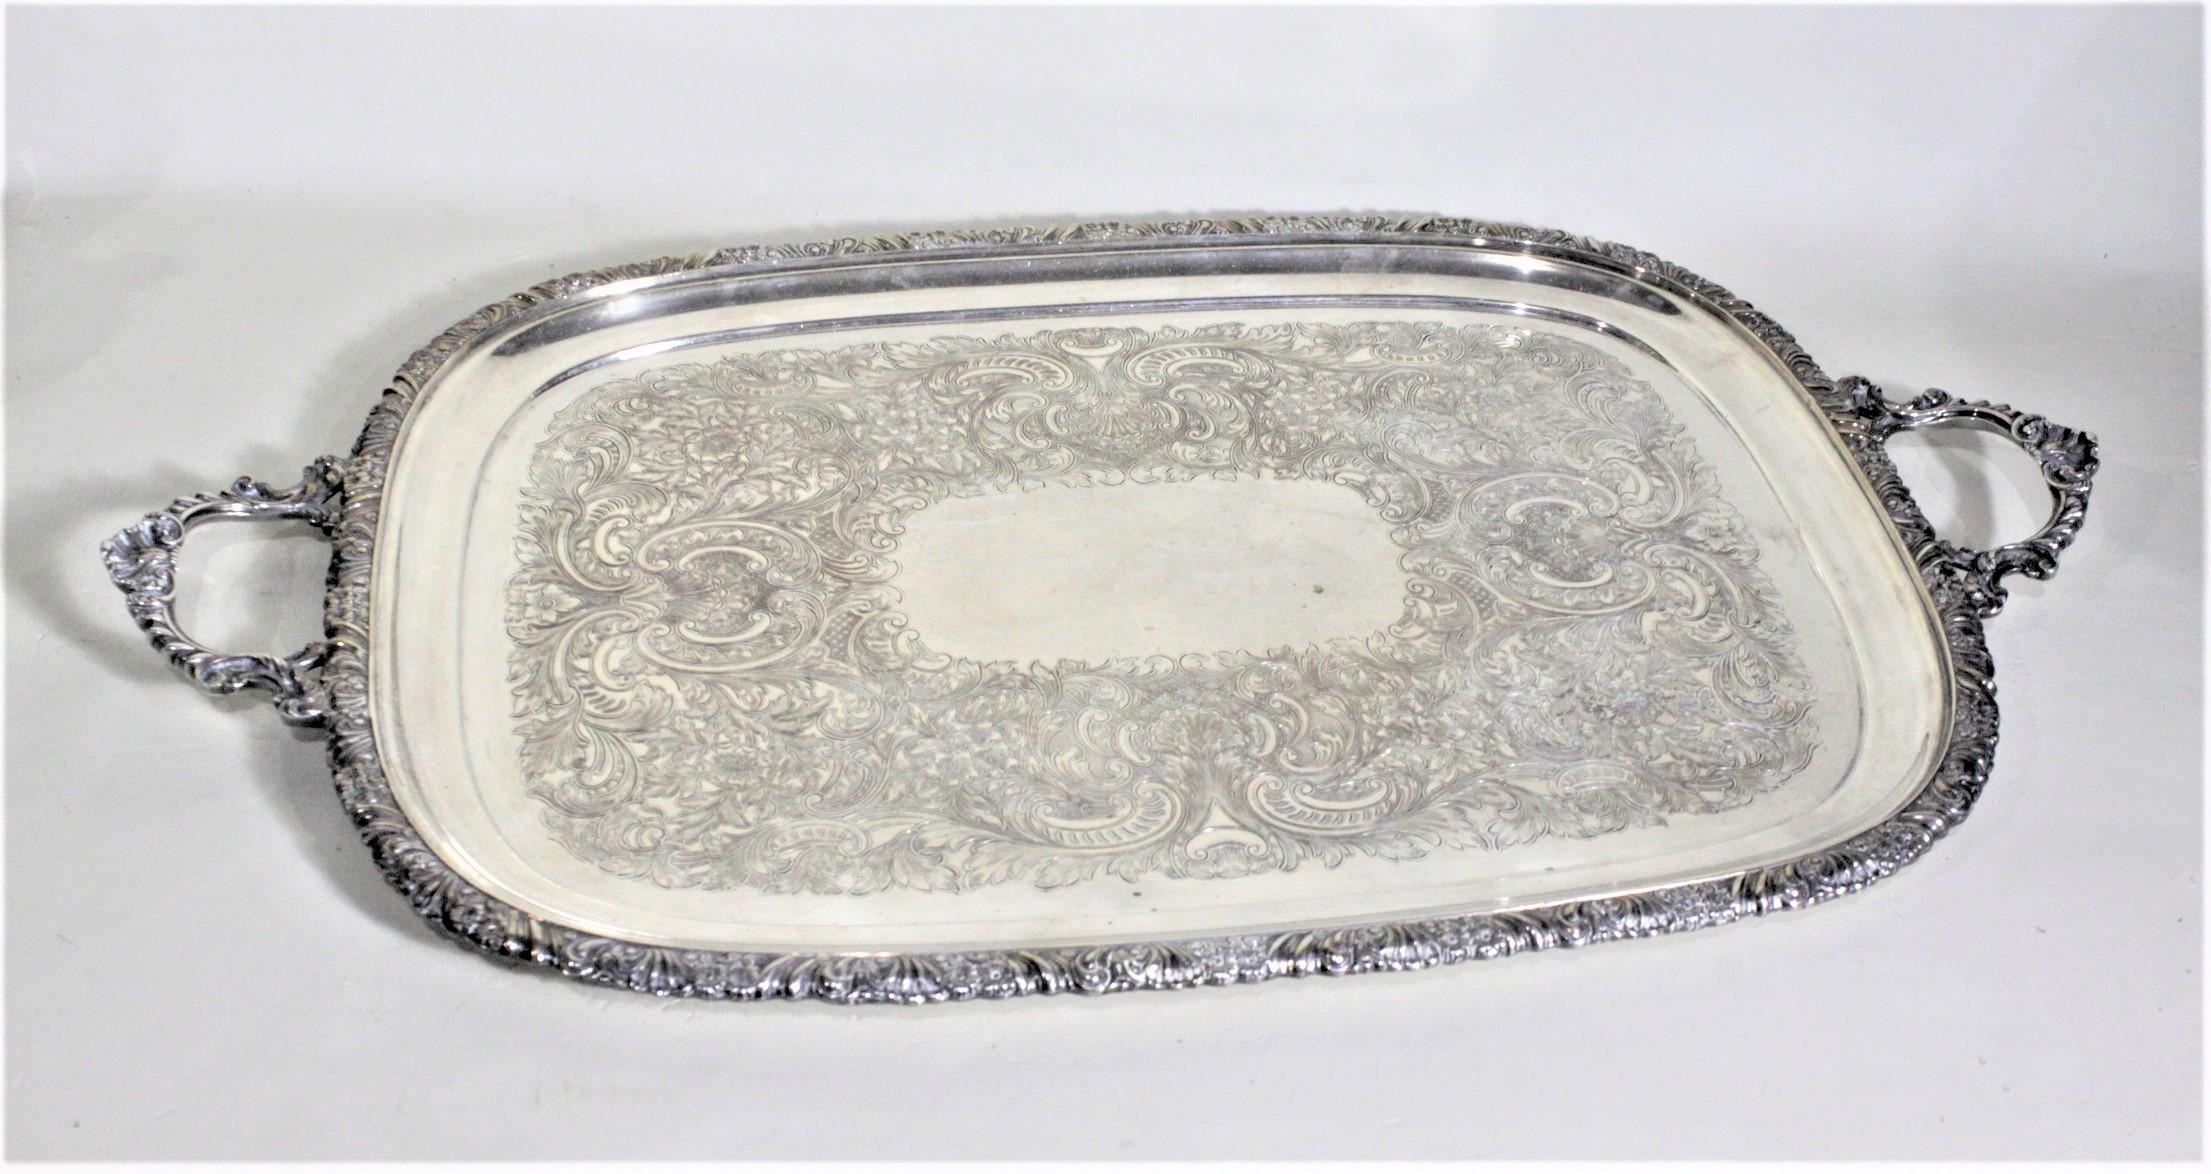 This ornate silver plated serving tray was made in England in approximately 1920 in a Victorian style. The tray has ornately decorated handles and outer rim done with a scrolling floral motif, which is accented by the scrolled leaves engraved on the